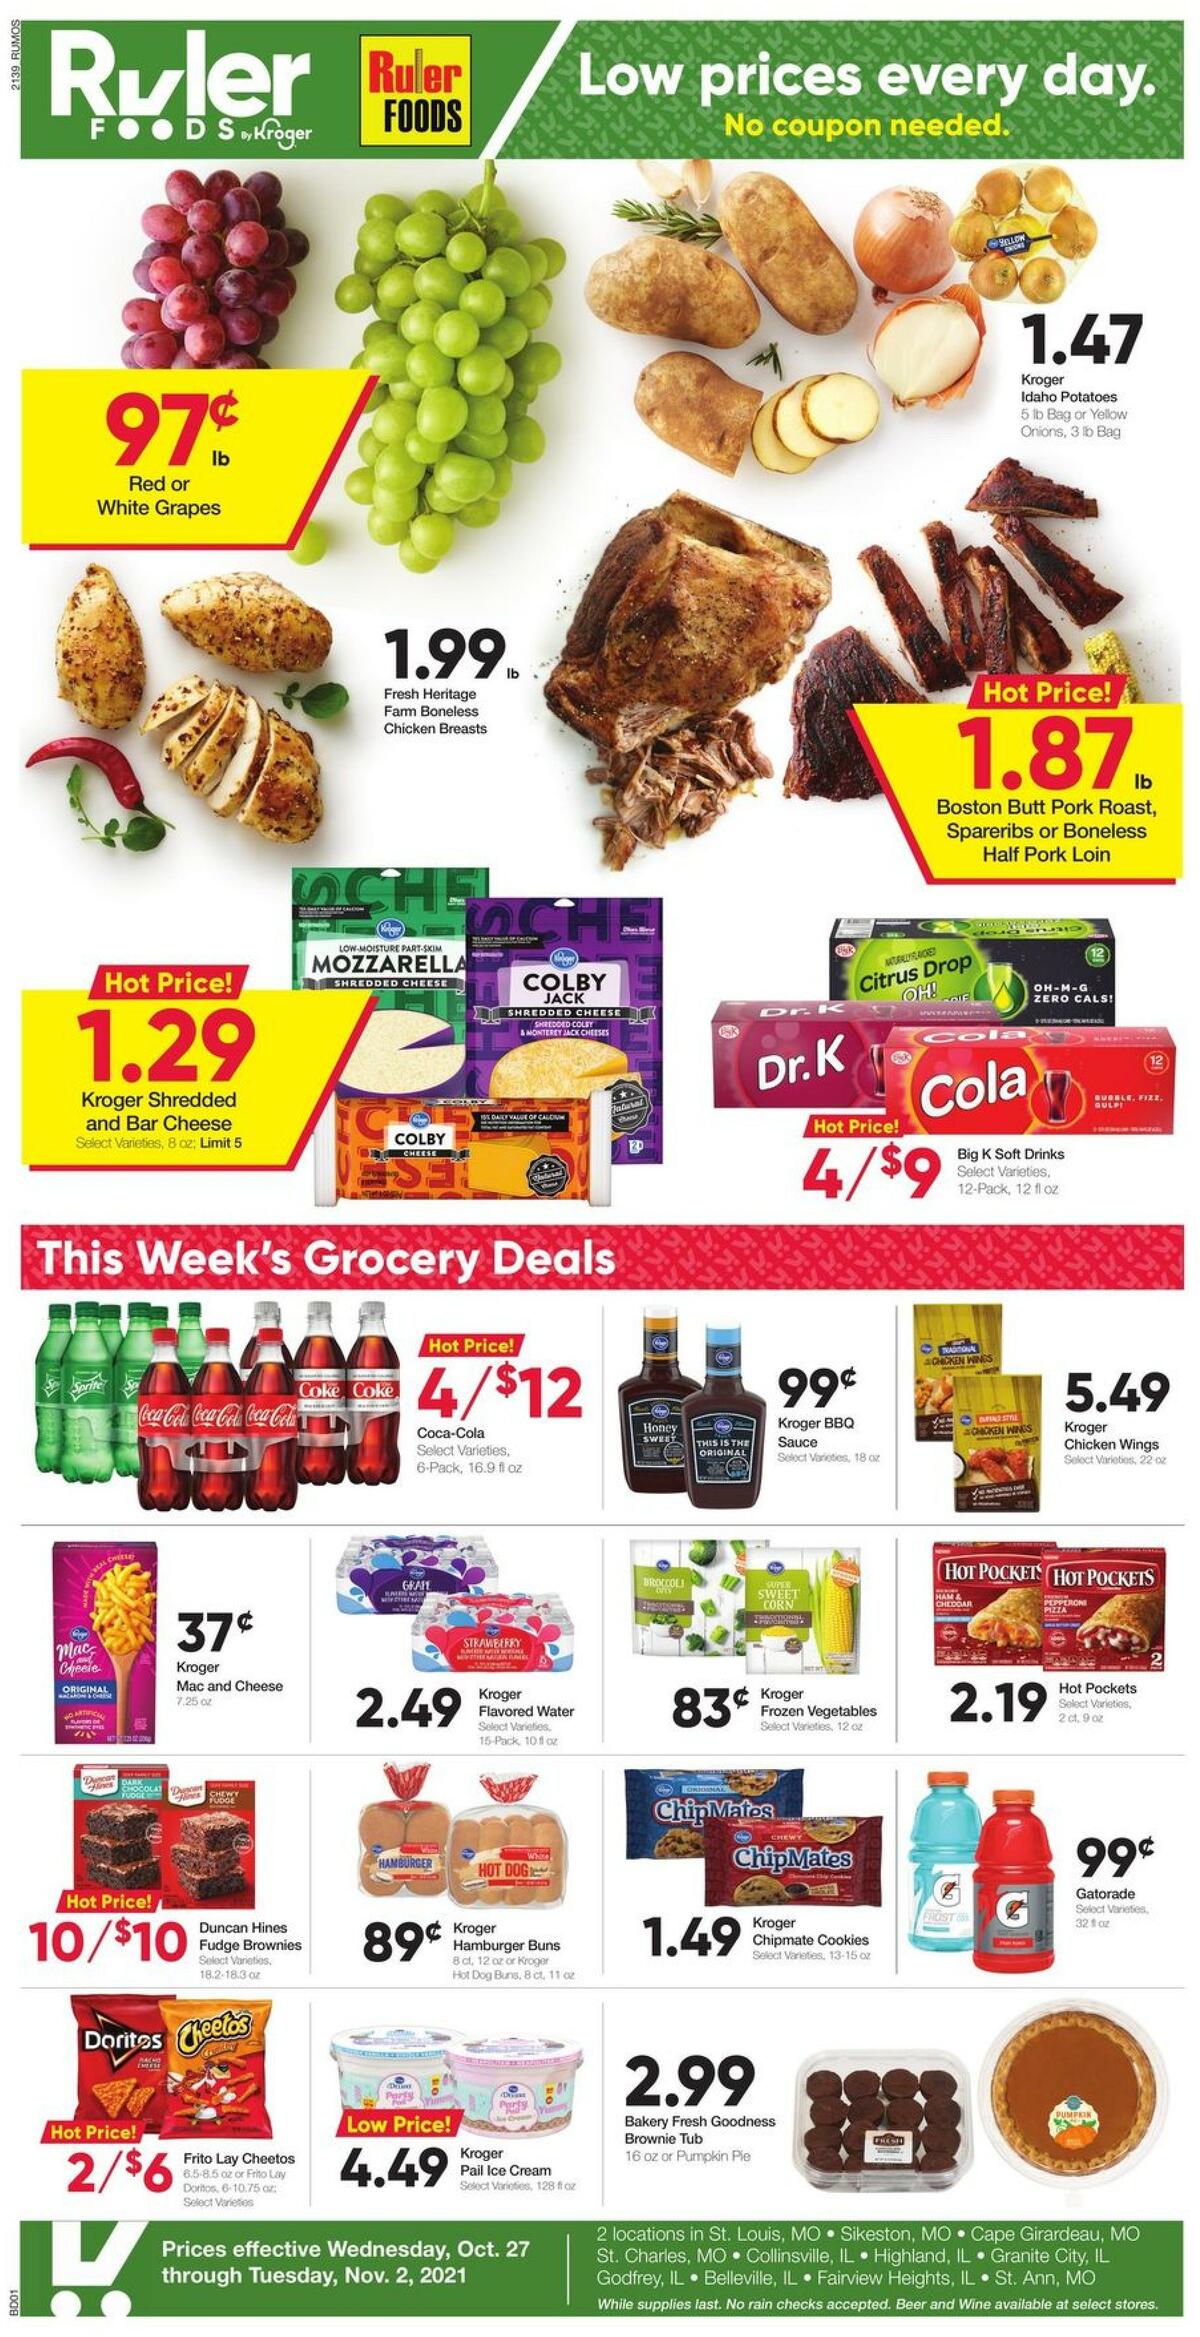 Ruler Foods Weekly Ad from October 27